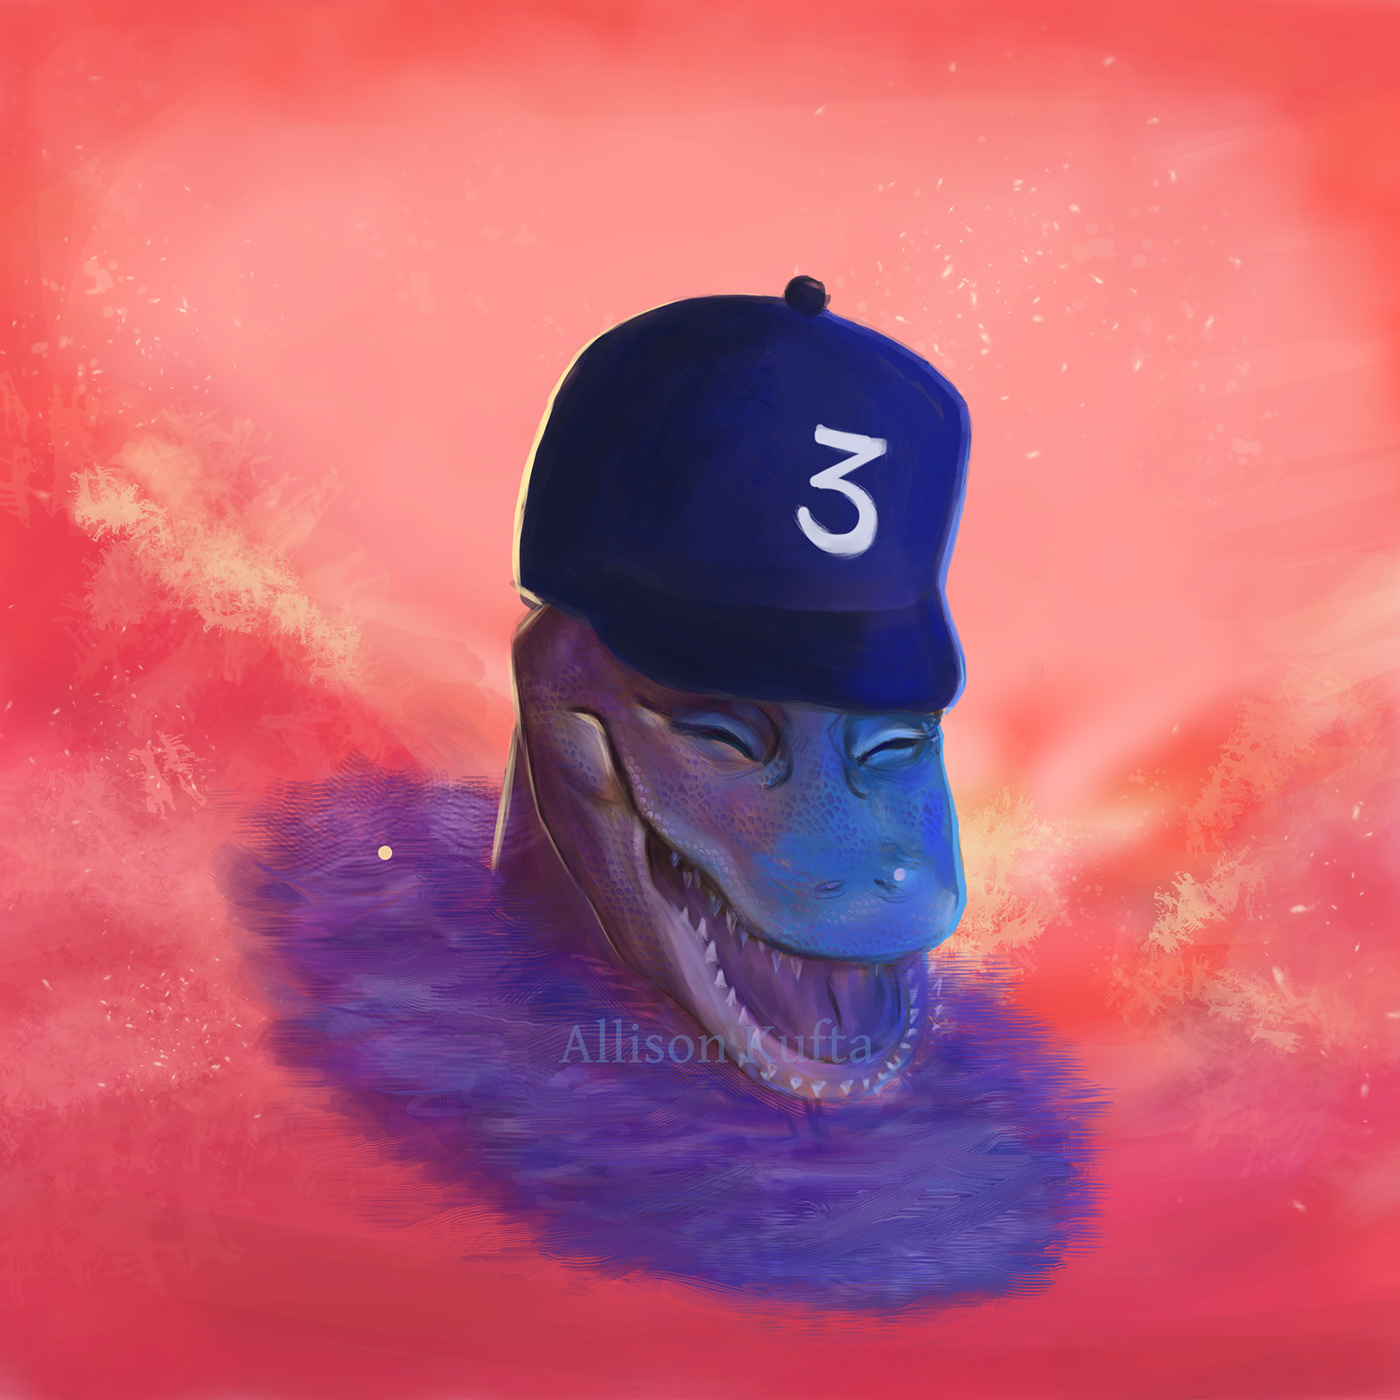 chance the rapper chance the snapper chicago culture coloring book krita digital painting experimental ILLUSTRATION  music